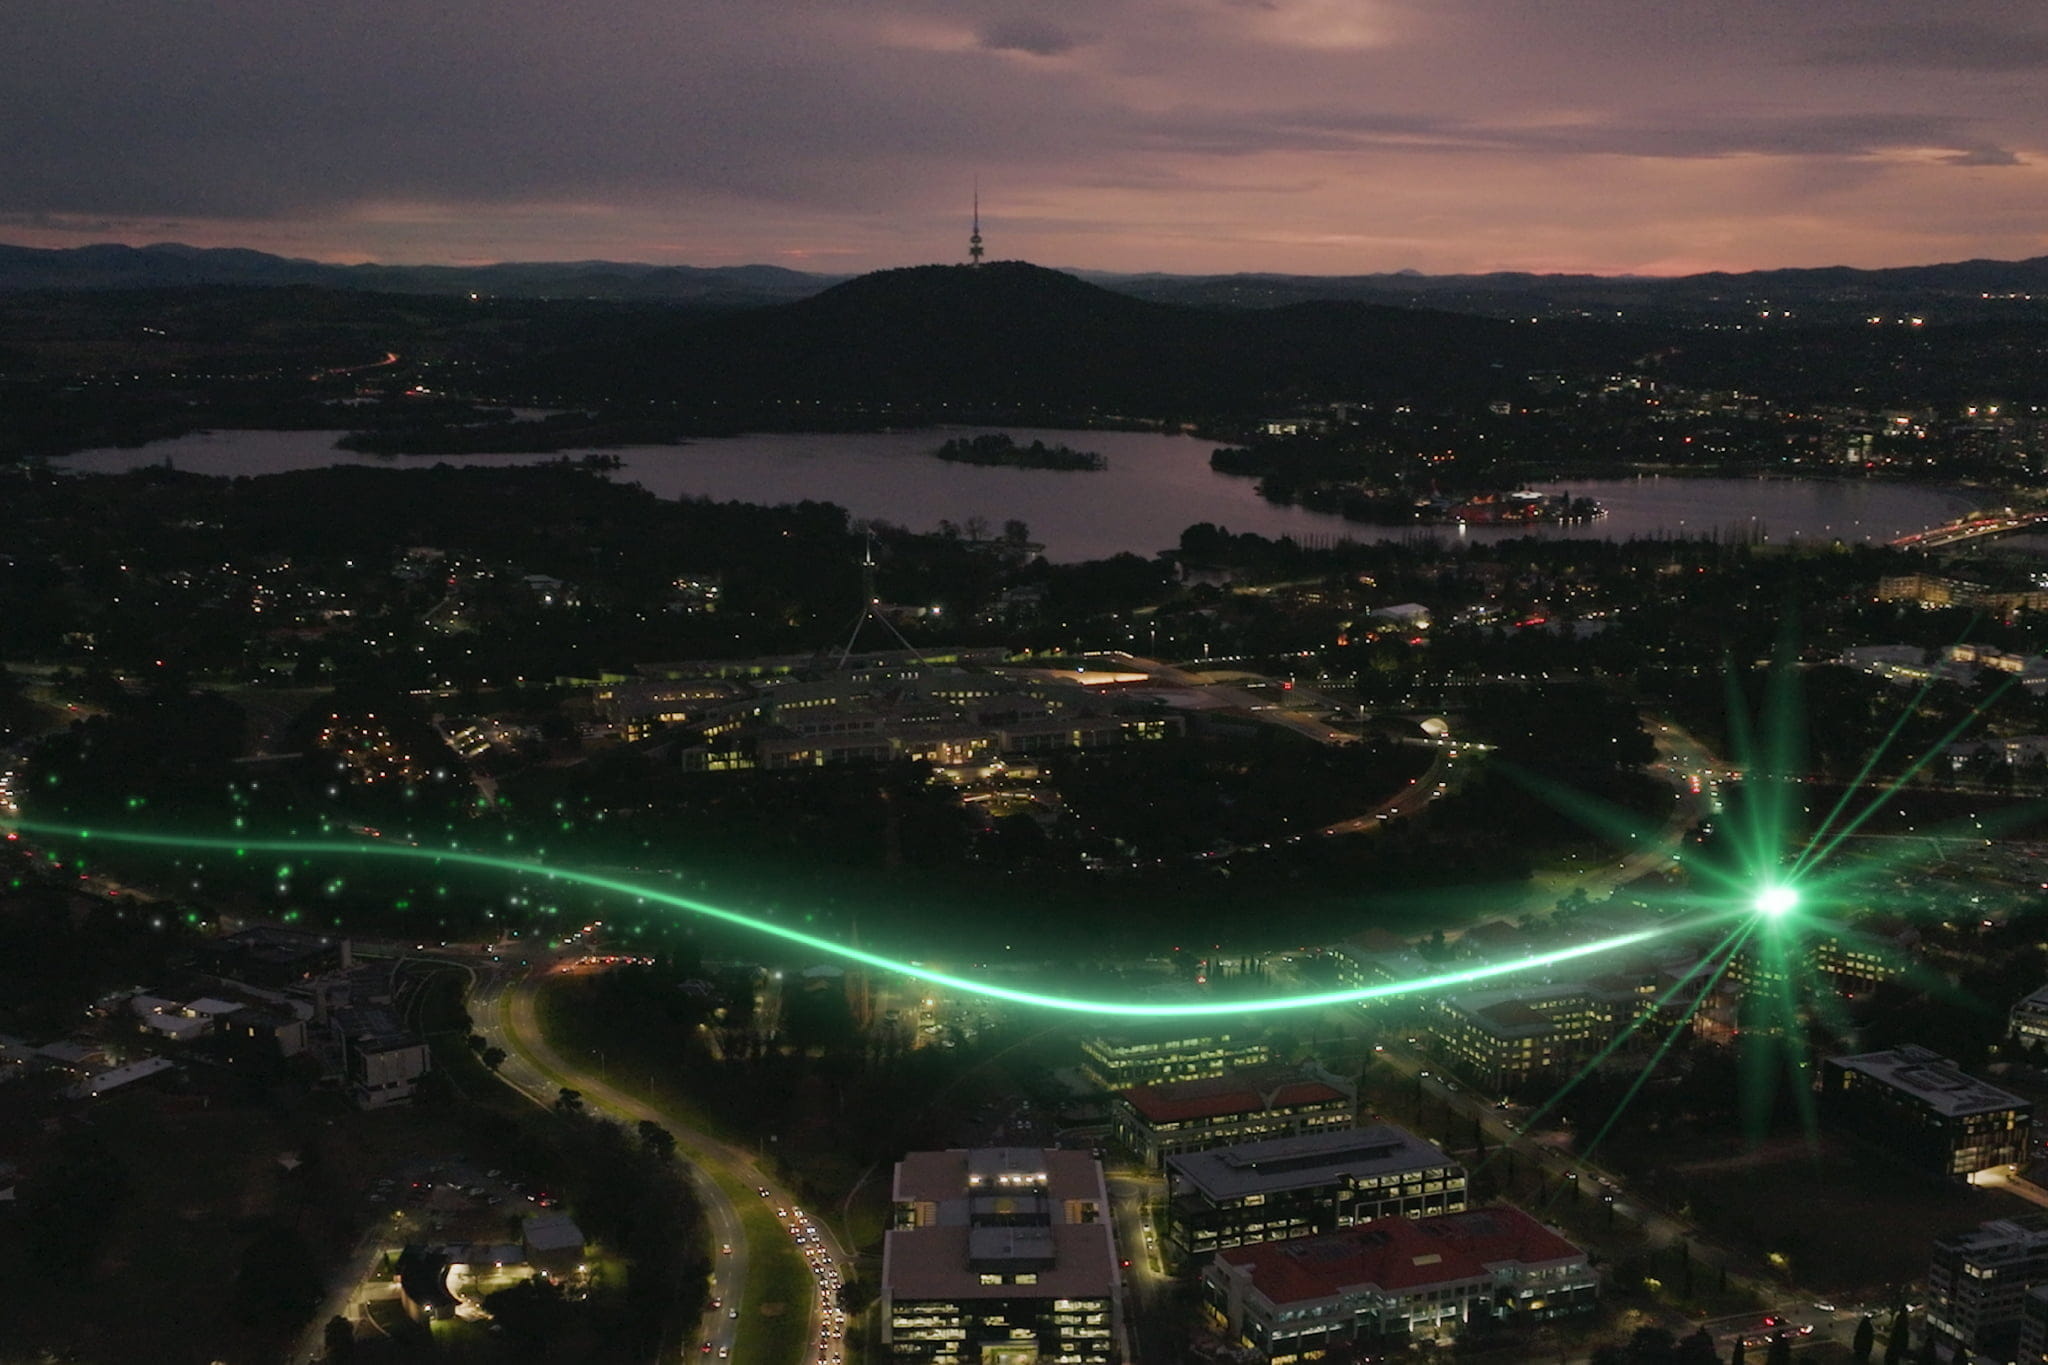 An aerial view portraying Canberra city at night with a green light